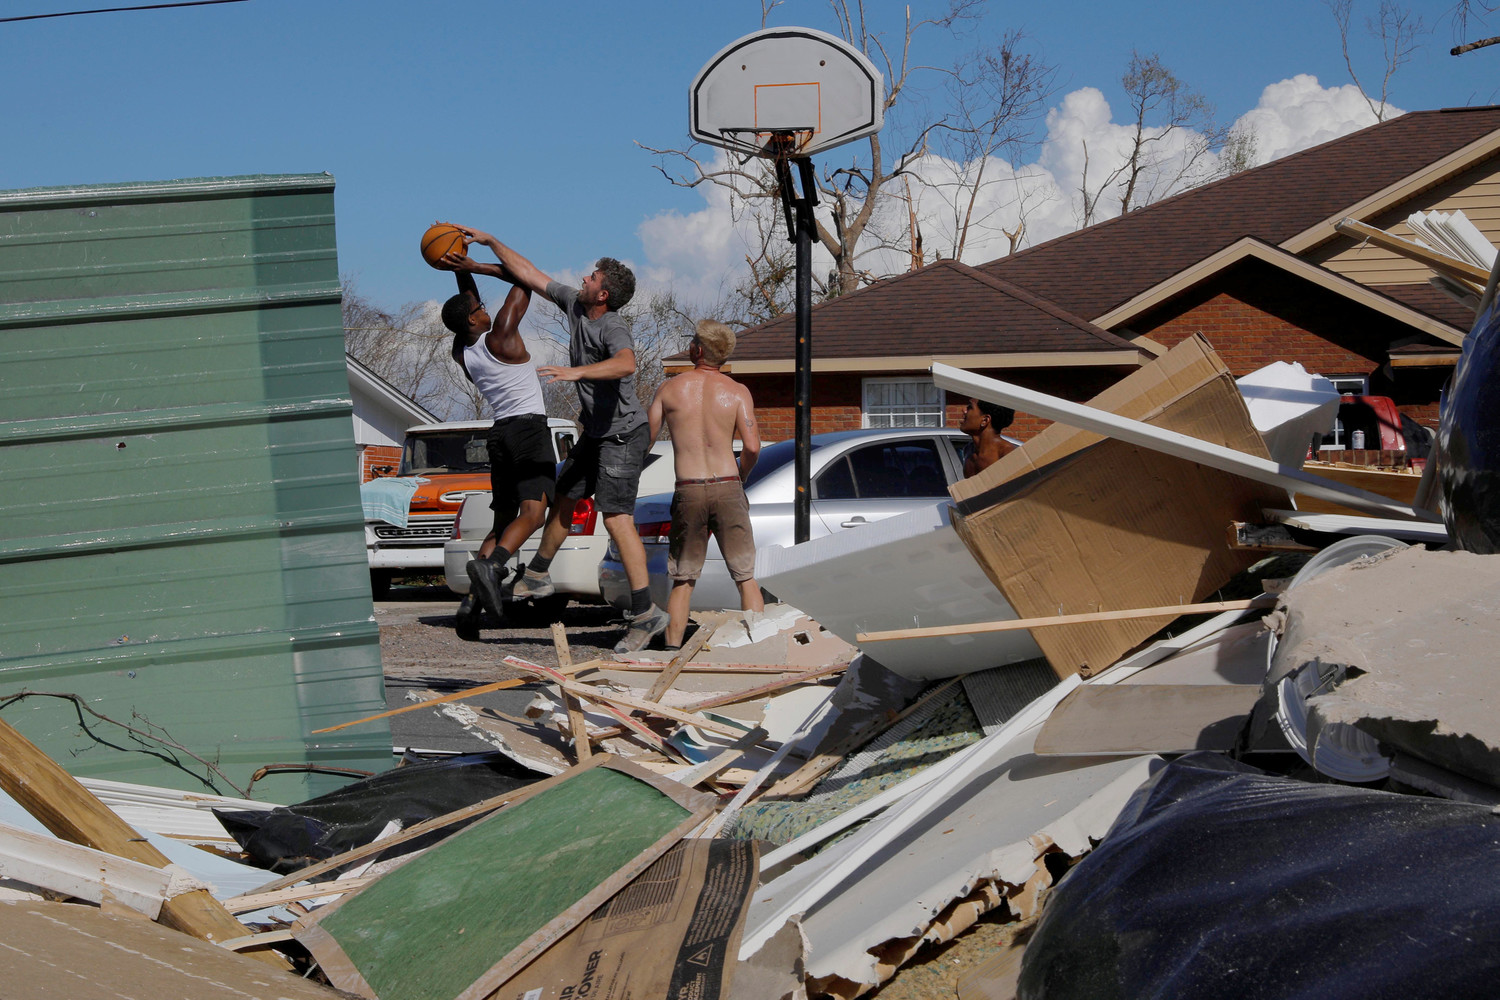 Contractors play basketball with residents amid debris Oct. 16 in the aftermath of Hurricane Michael in Springfield, Fla. The hurricane killed at least 16 people in Florida, most of them in the coastal county that took a direct hit from the storm, state emergency authorities said. That’s in addition to at least 10 deaths elsewhere across the South.